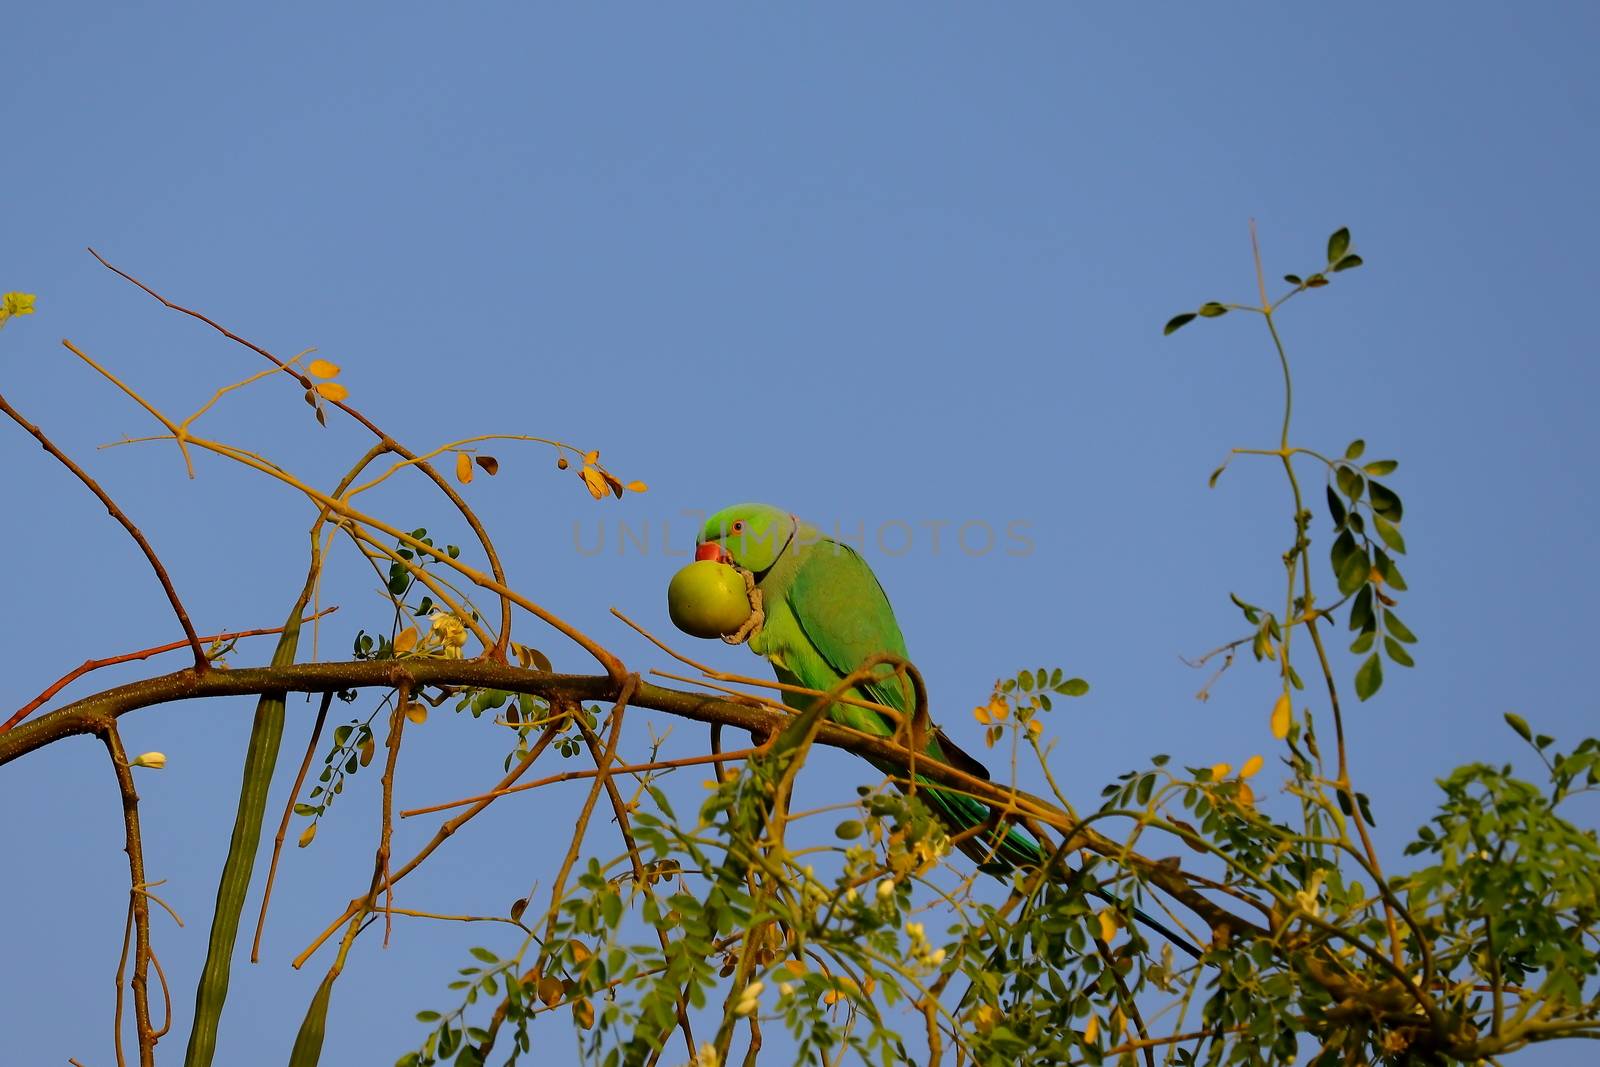 a young male parrot carrying jujube fruit and sitting on the branch